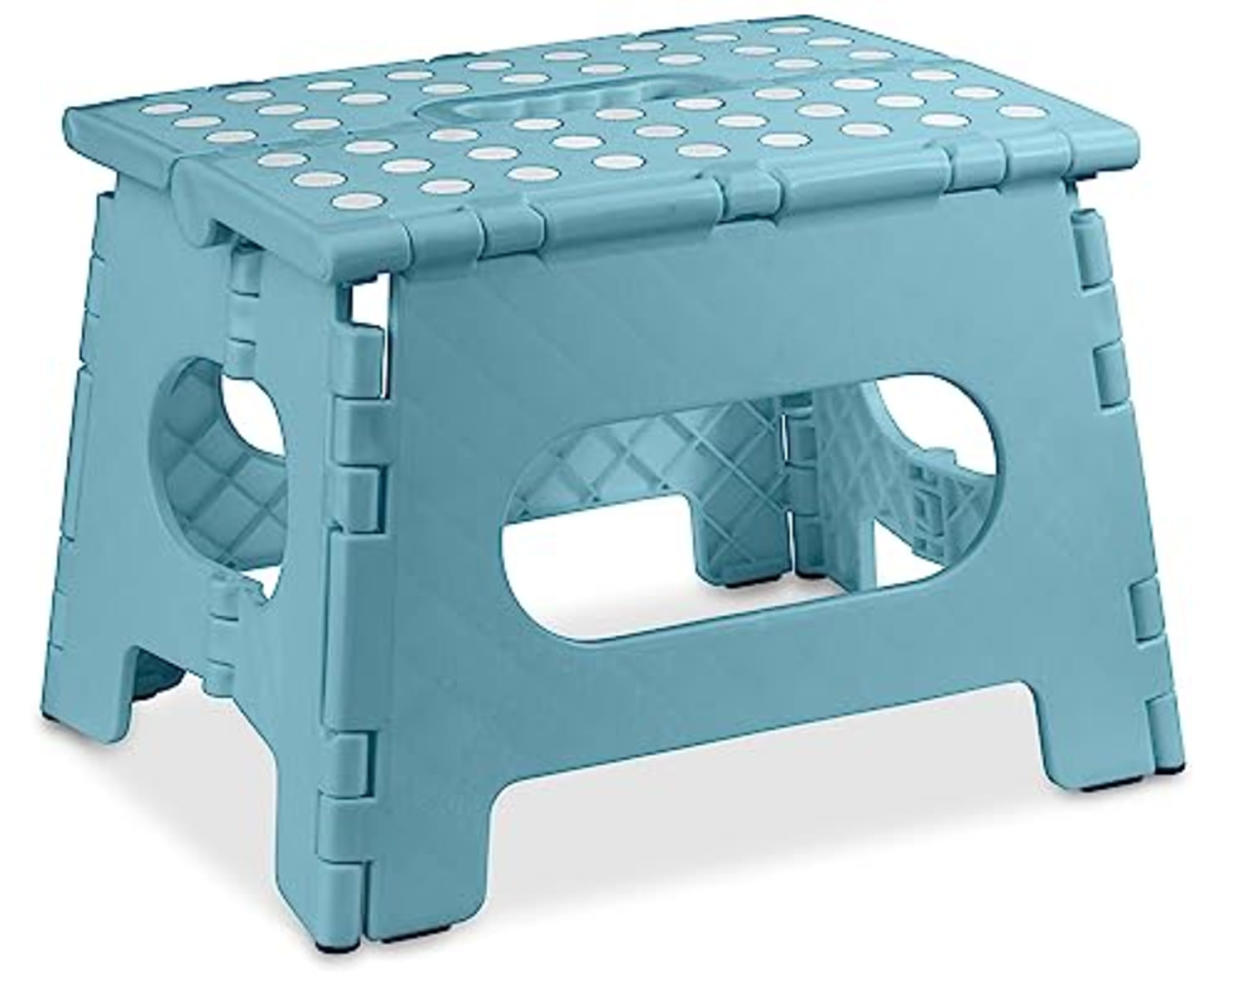 Folding Step Stool - The Lightweight Step Stool is Sturdy Enough to Support Adults and Safe Enough for Kids. Opens Easy with One Flip. Great for Kitchen, Bathroom, Bedroom, Kids or Adults. (Teal) (AMAZON)